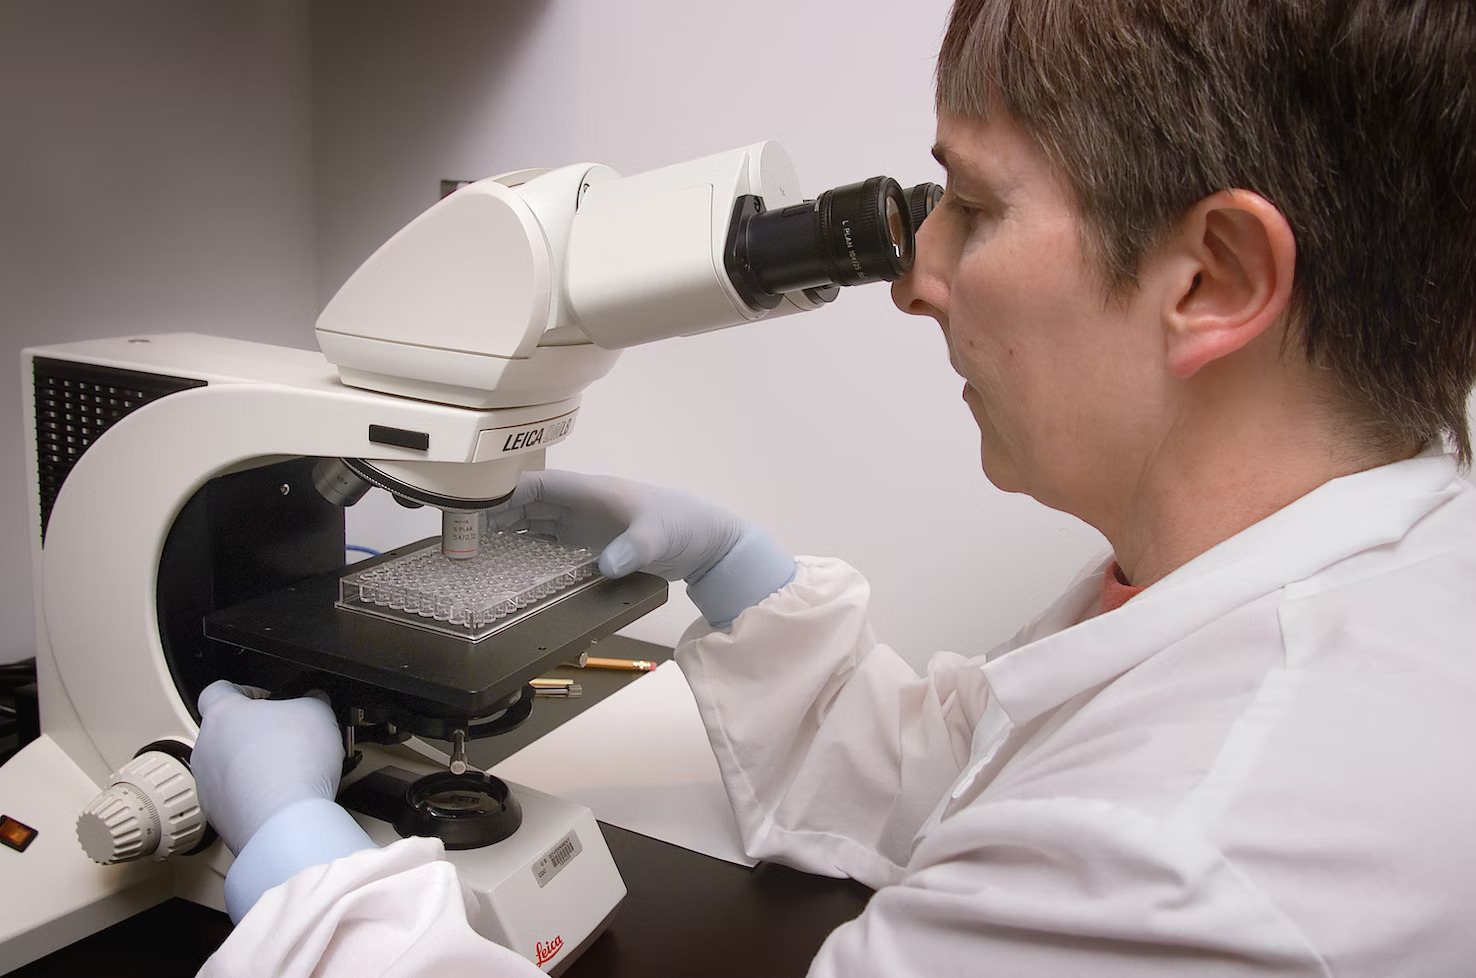 lab technician looking at samples through a microscope